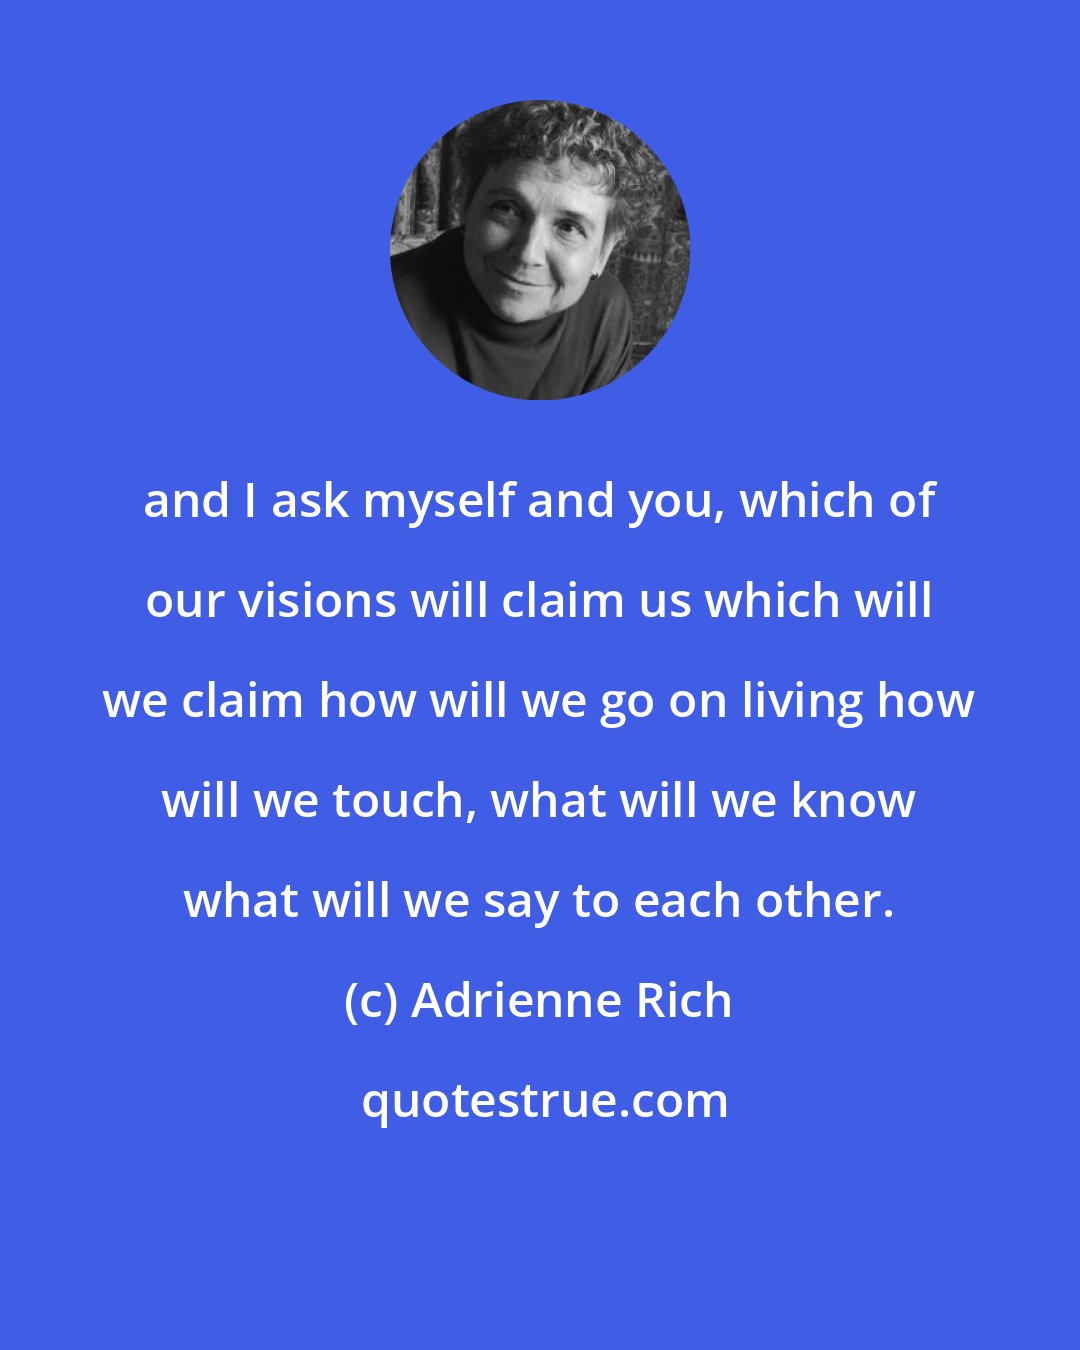 Adrienne Rich: and I ask myself and you, which of our visions will claim us which will we claim how will we go on living how will we touch, what will we know what will we say to each other.